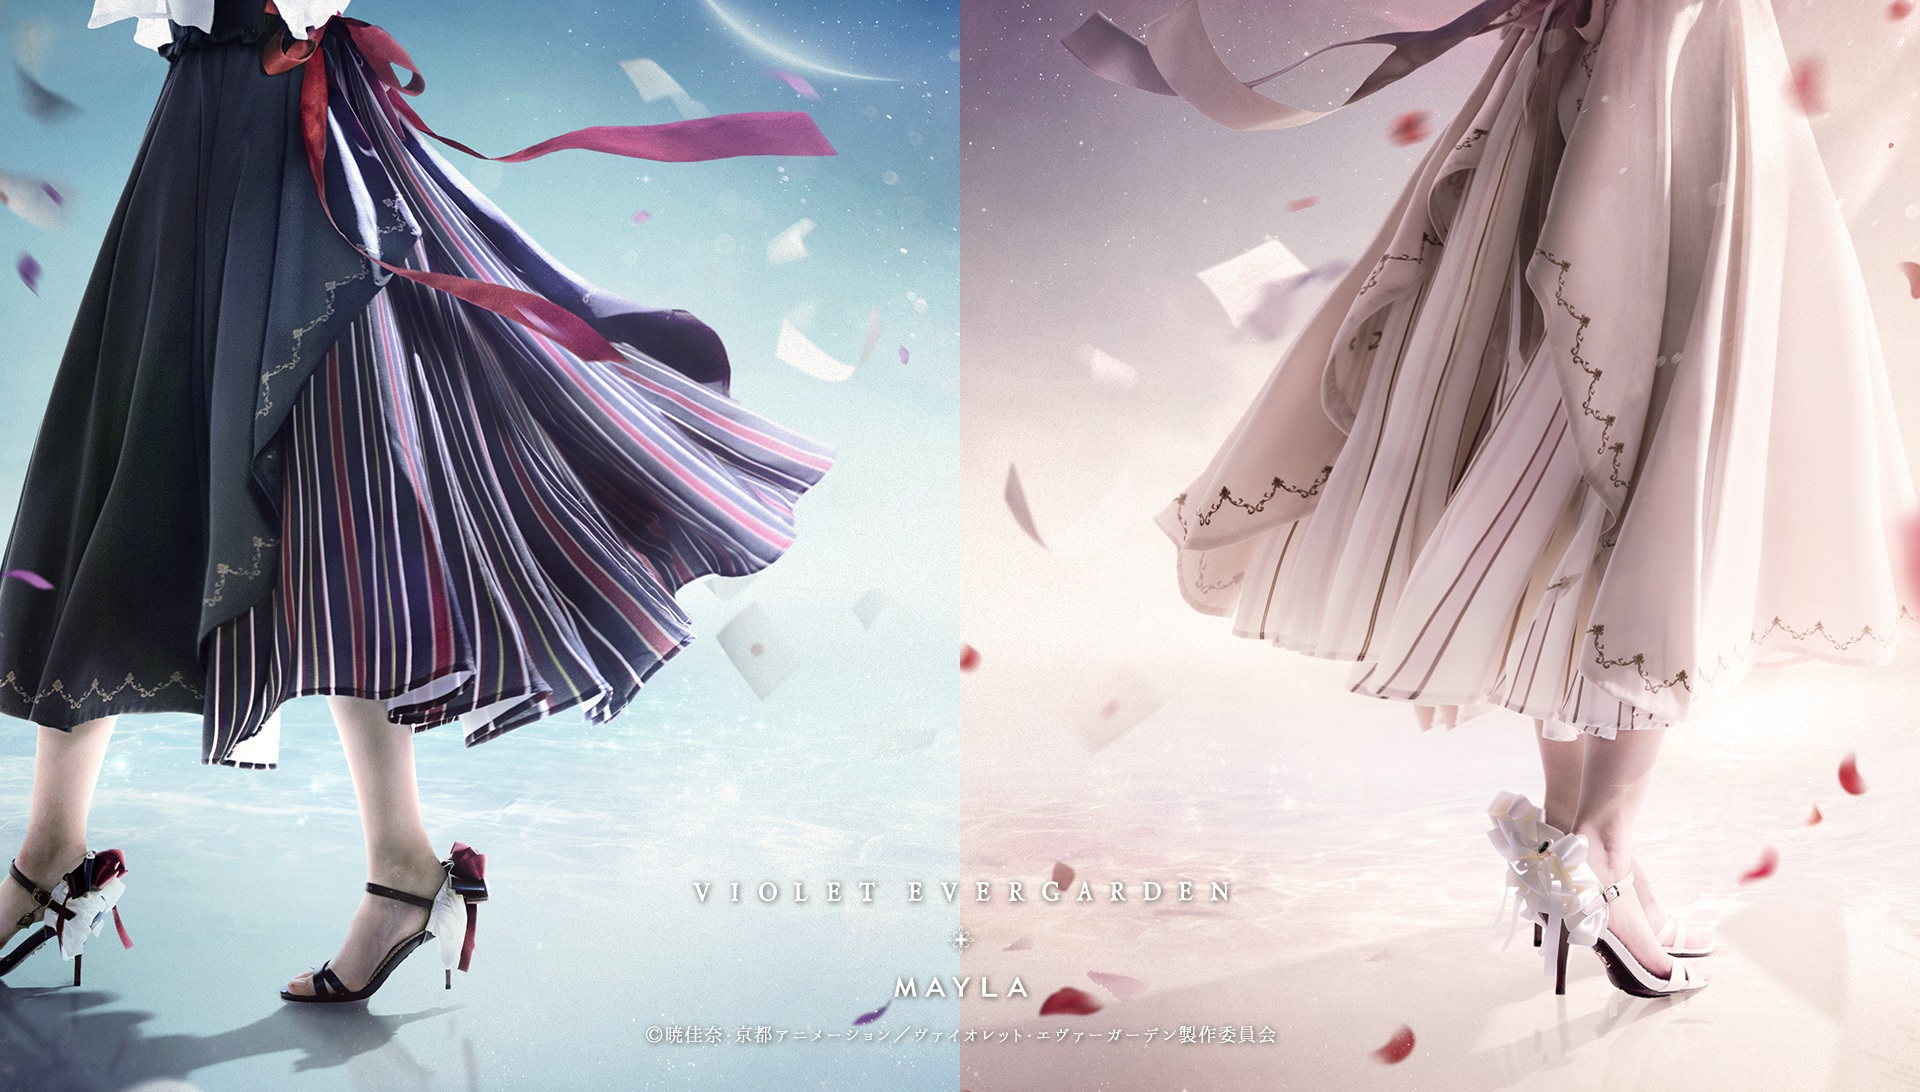 Beautiful Violet Evergarden anime skirts going on sale in Japan【Photos ...